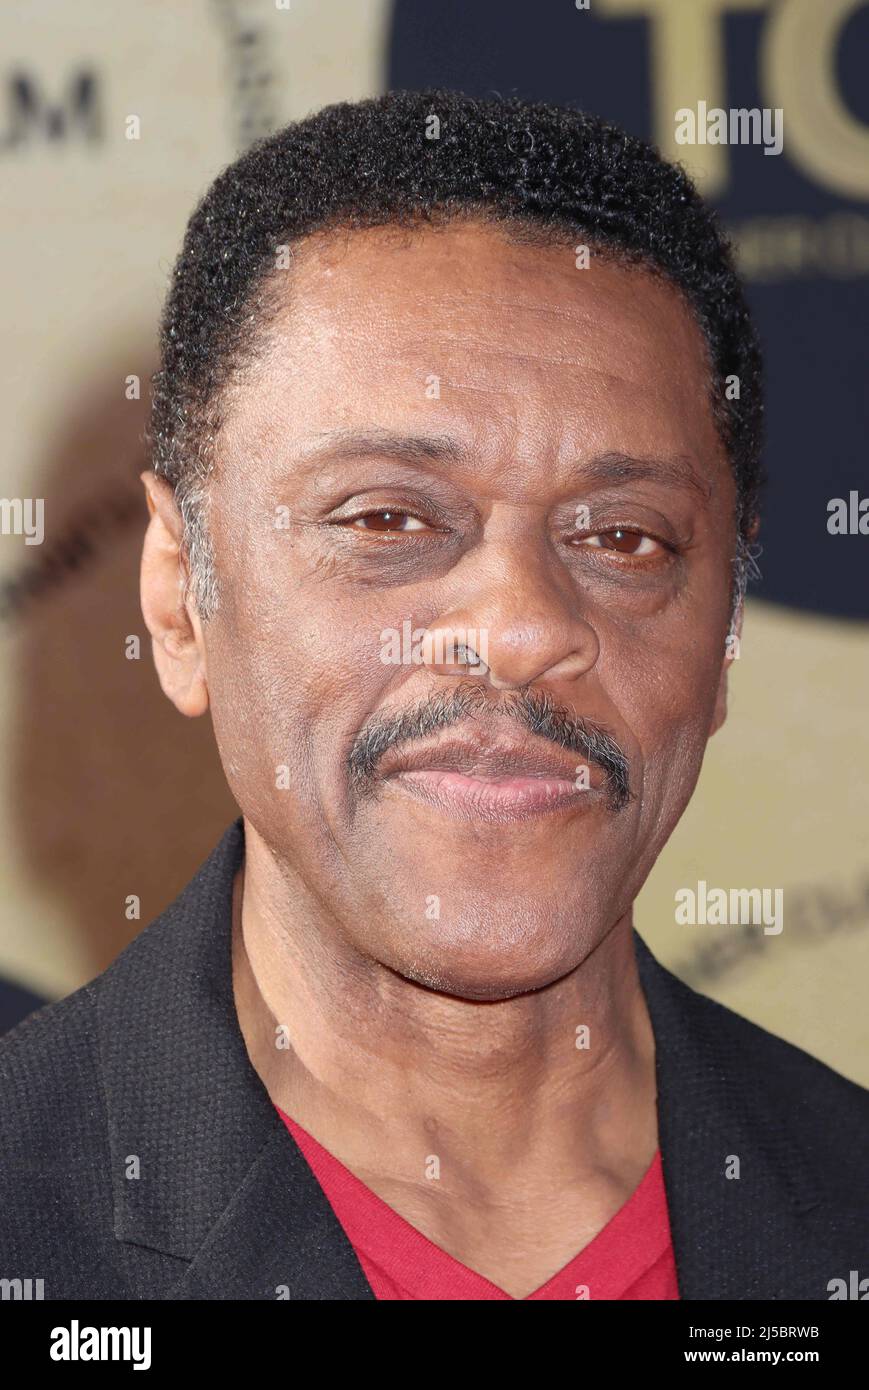 Hollywood, USA. 21st Apr, 2022. Lawrence Hilton-Jacobs 2022/04/21 The 40th Anniversary Screening of “E.T. the Extra-Terrestrial” held at TCL Chinese Theatre in Hollywood, CA Photo by Kazuki Hirata/Hollywood News Wire Inc. Credit: Hollywood News Wire Inc./Alamy Live News Stock Photo